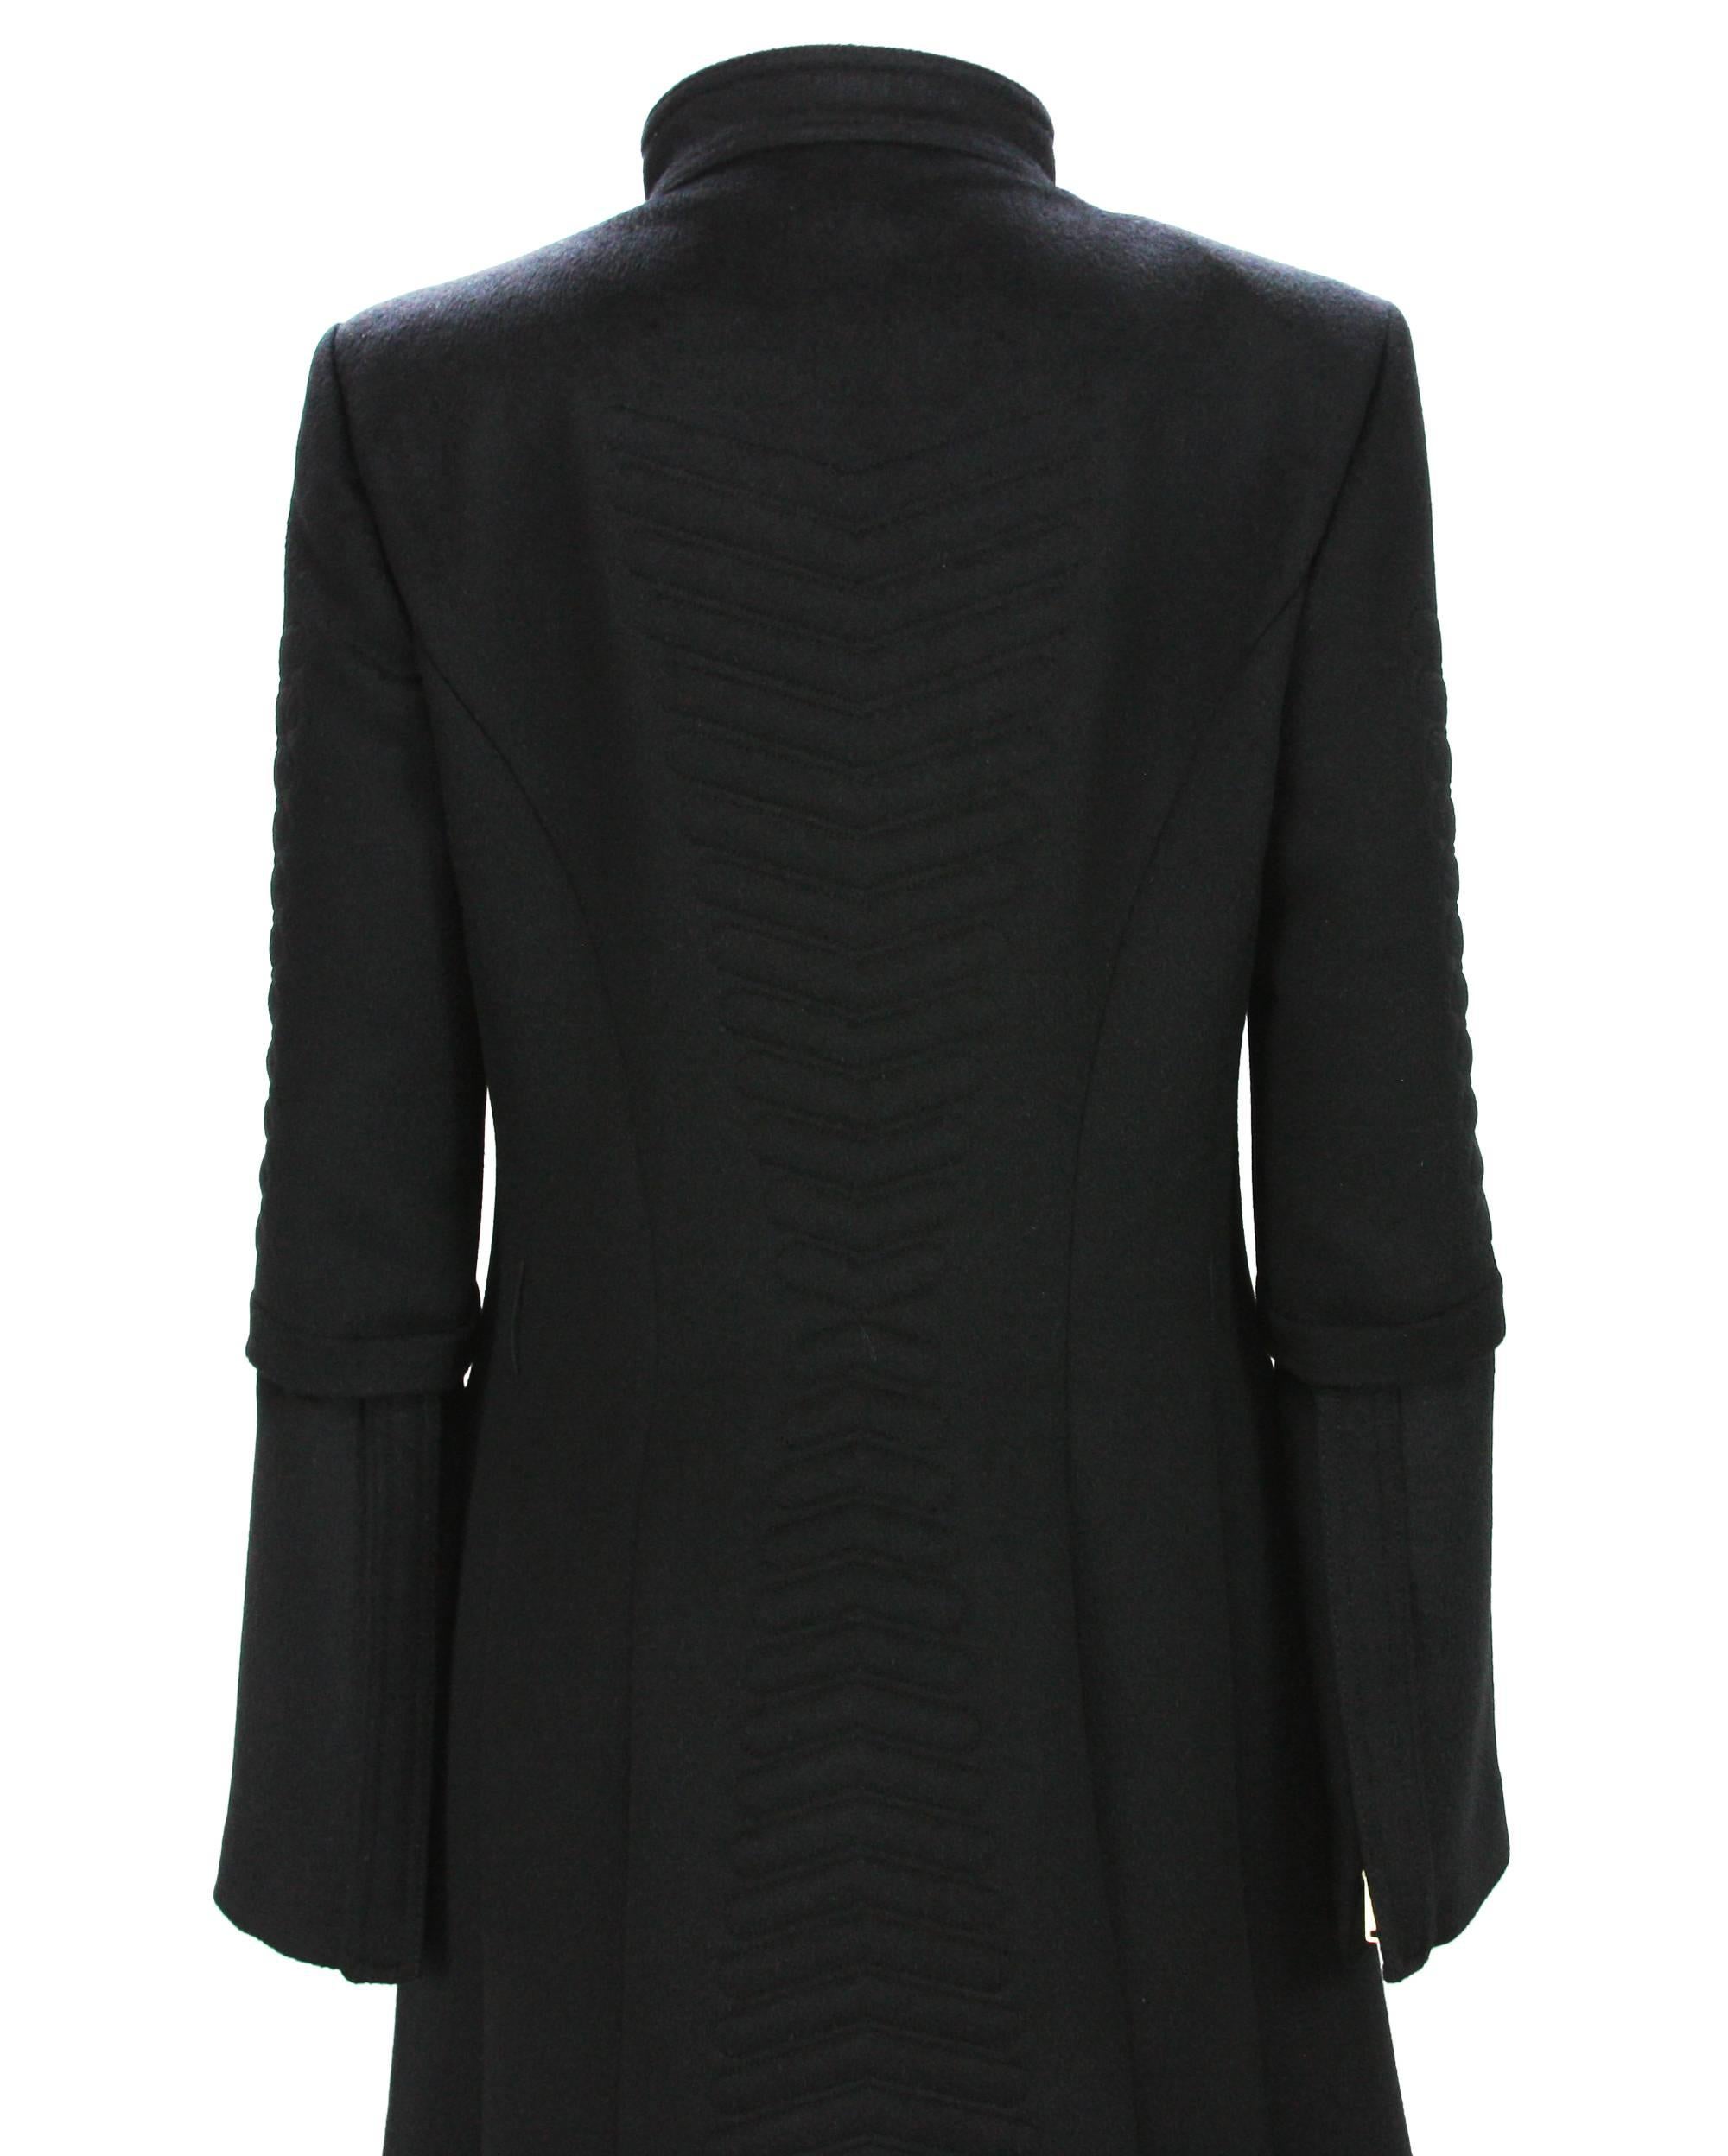 A/W 2004 Tom Ford for Gucci Chevron Quilting Black Angora Wool Coat It 44 - US 8 3